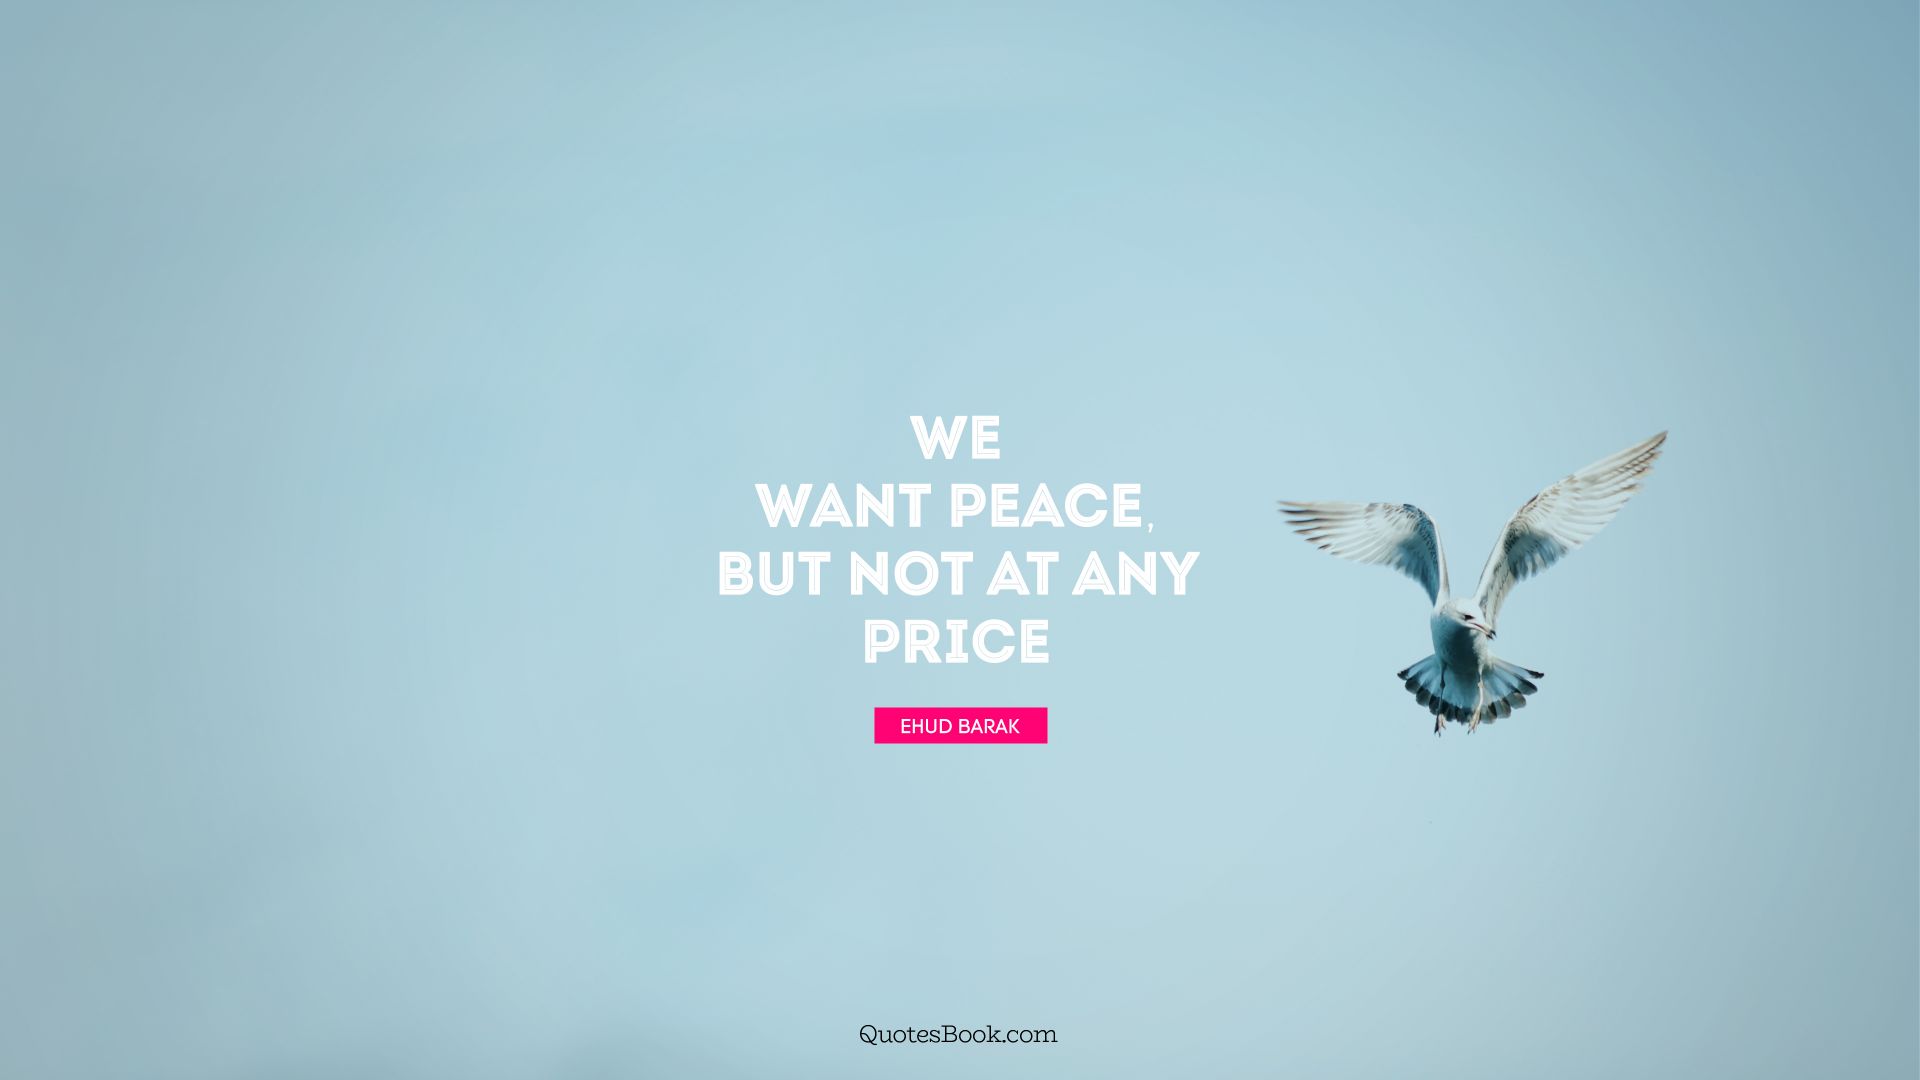 We want peace, but not at any price. - Quote by Ehud Barak